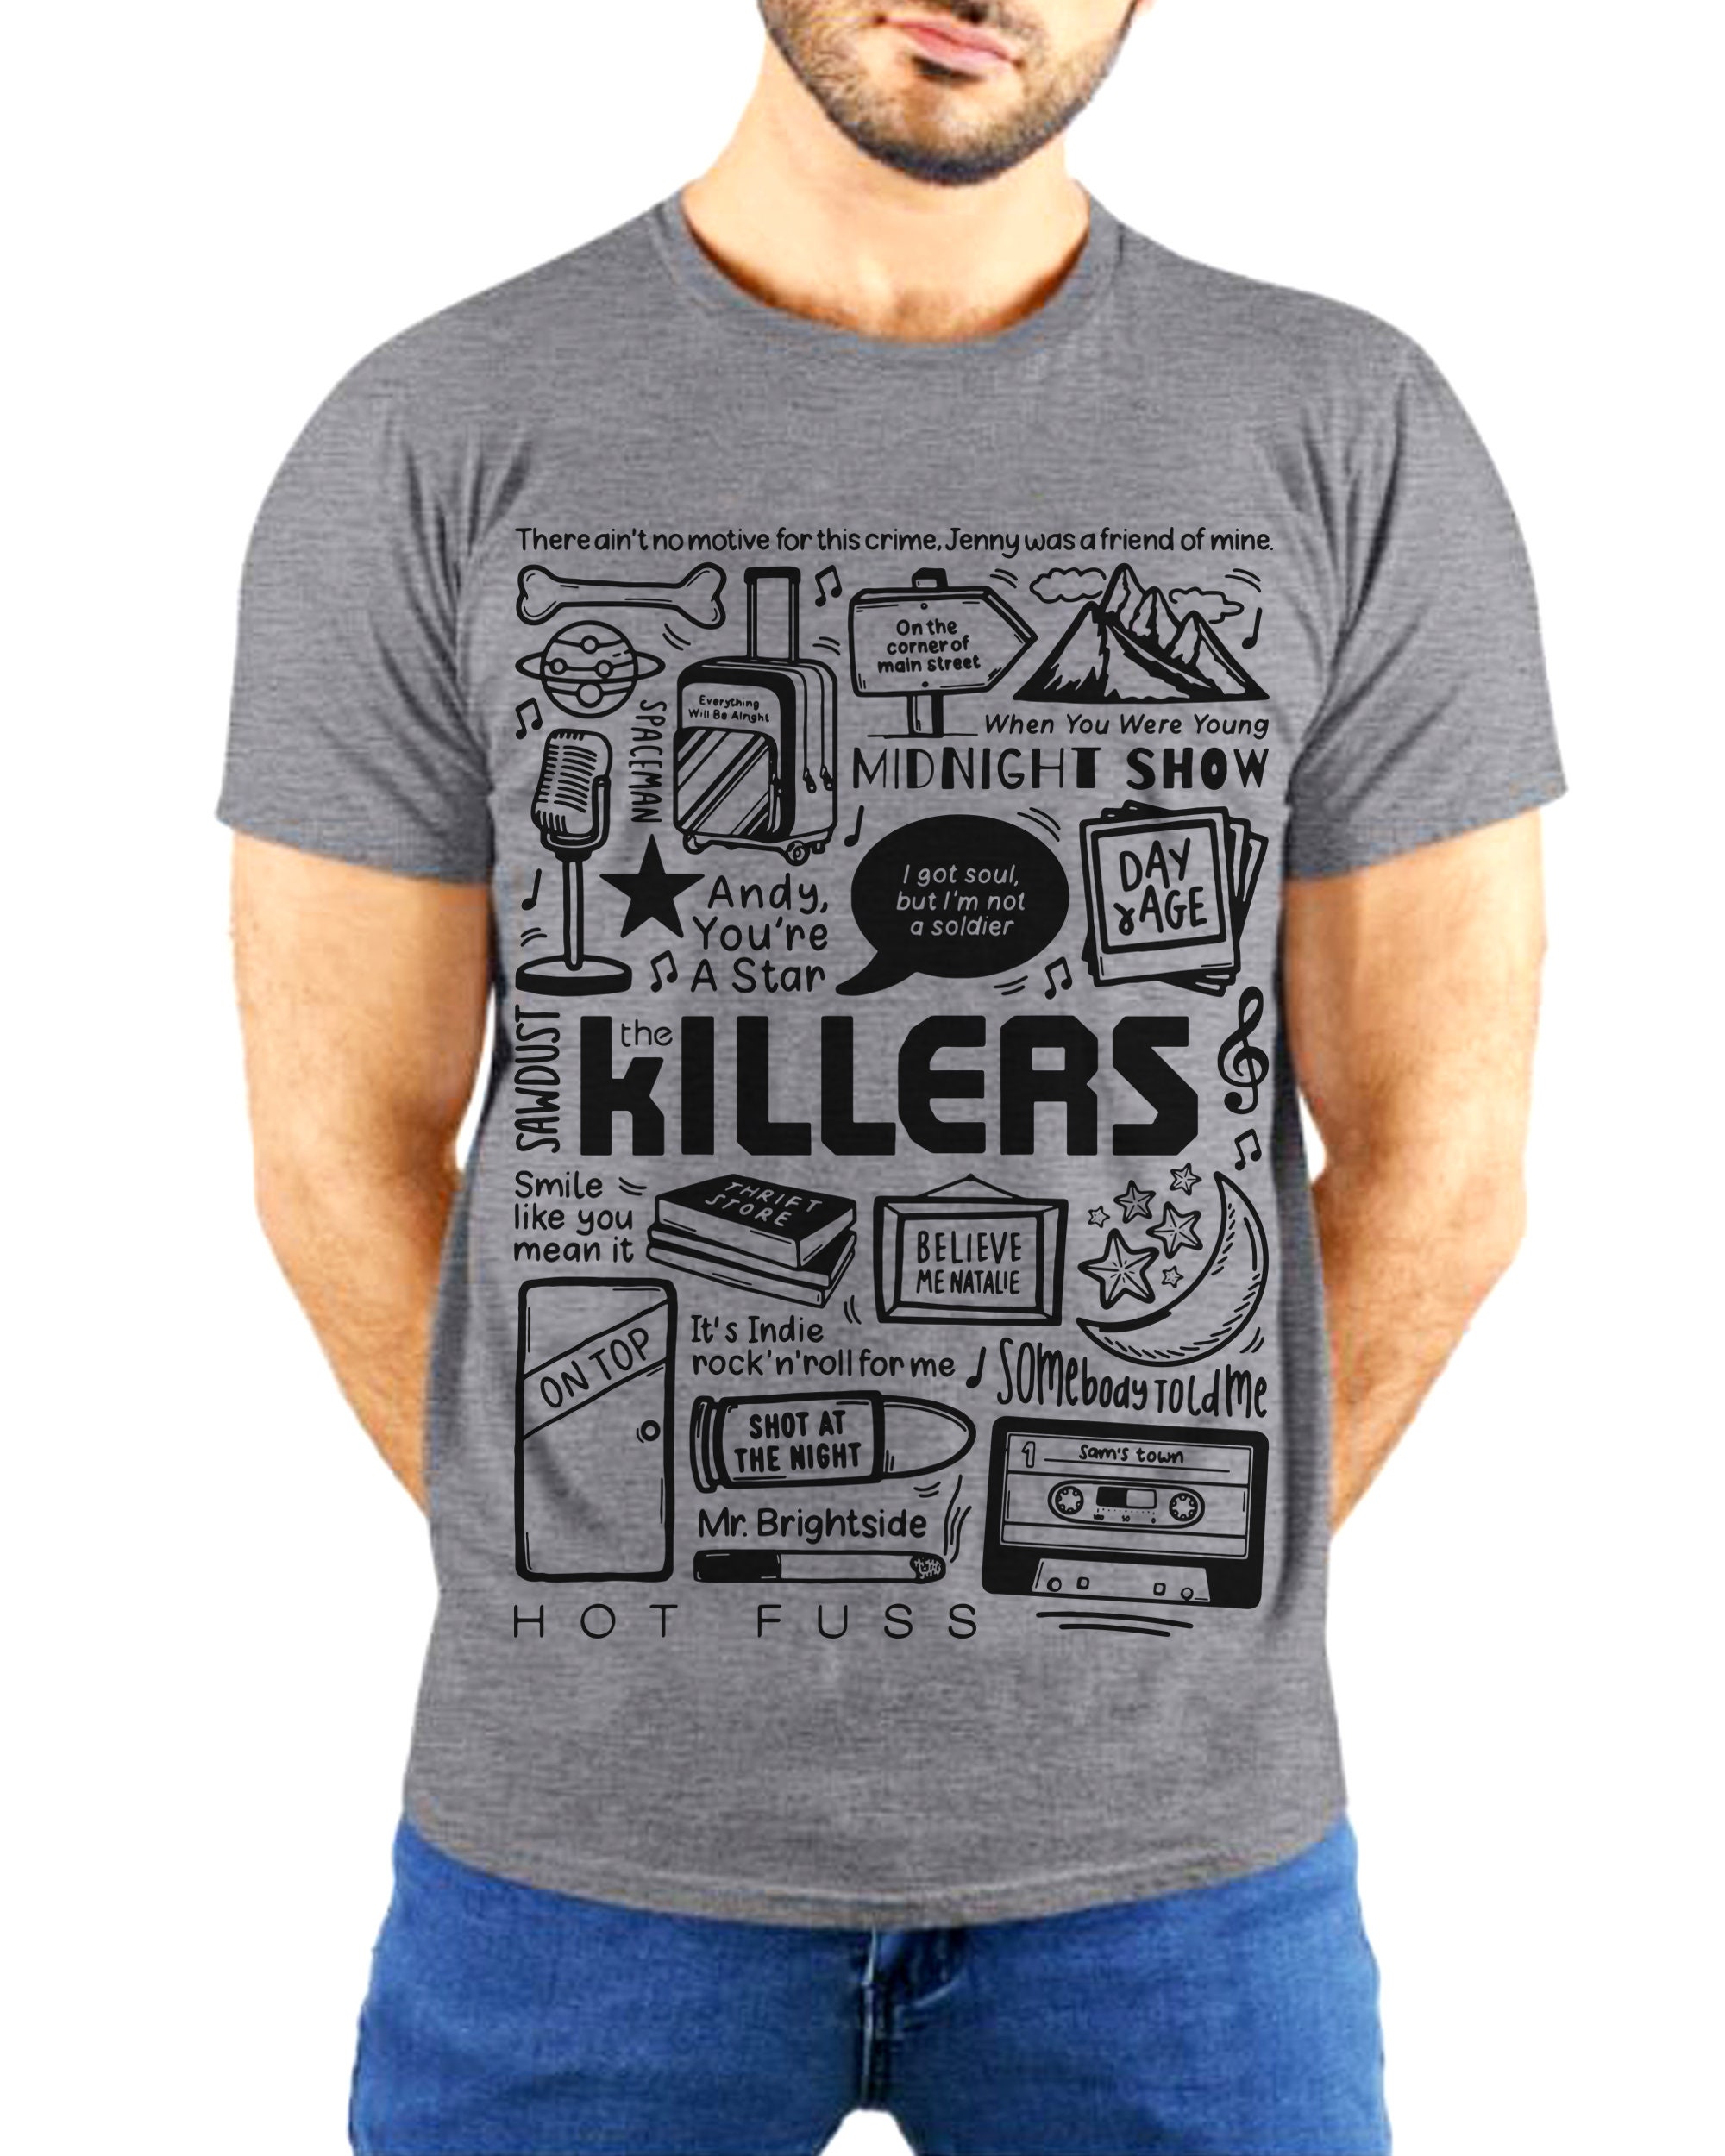 Discover The Killers, The Killers Unisex, The Killers Tee, The Killers Shirt, The Killers T-Shirt, The Killers Clothing, The Killers Band.